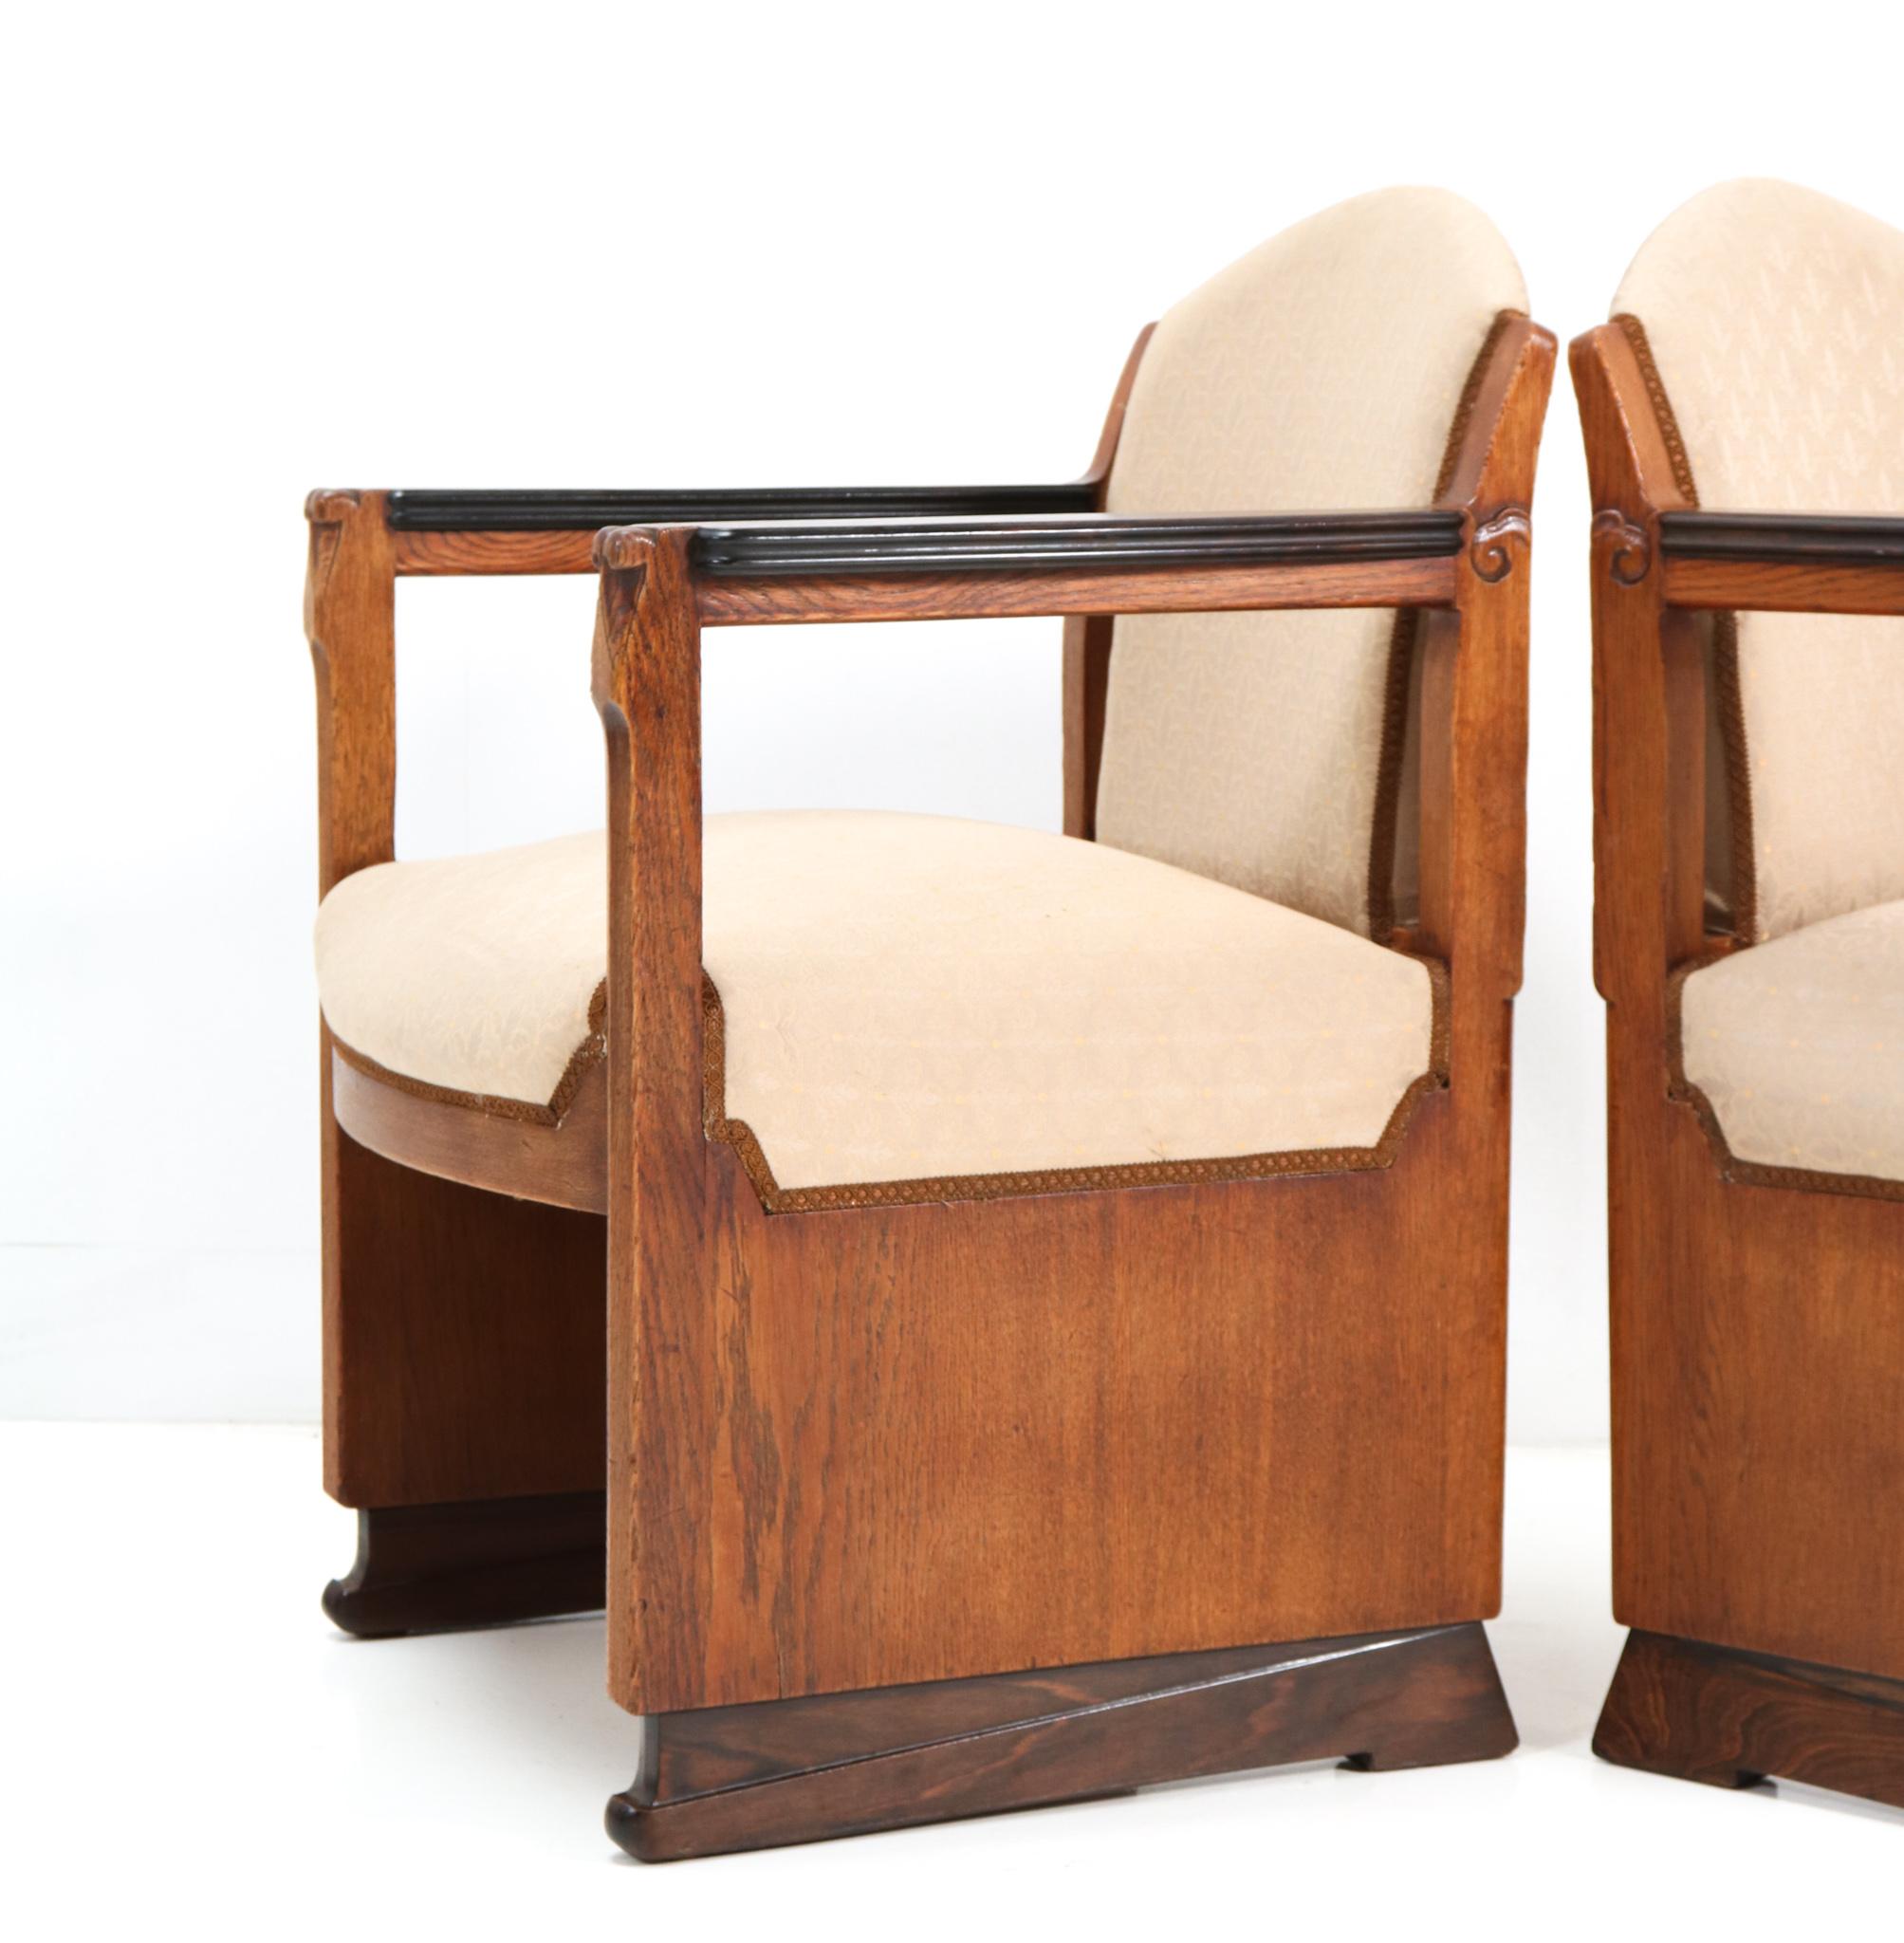 Two Oak Art Deco Amsterdamse School Armchairs by Hildo Krop for 't Woonhuys For Sale 5